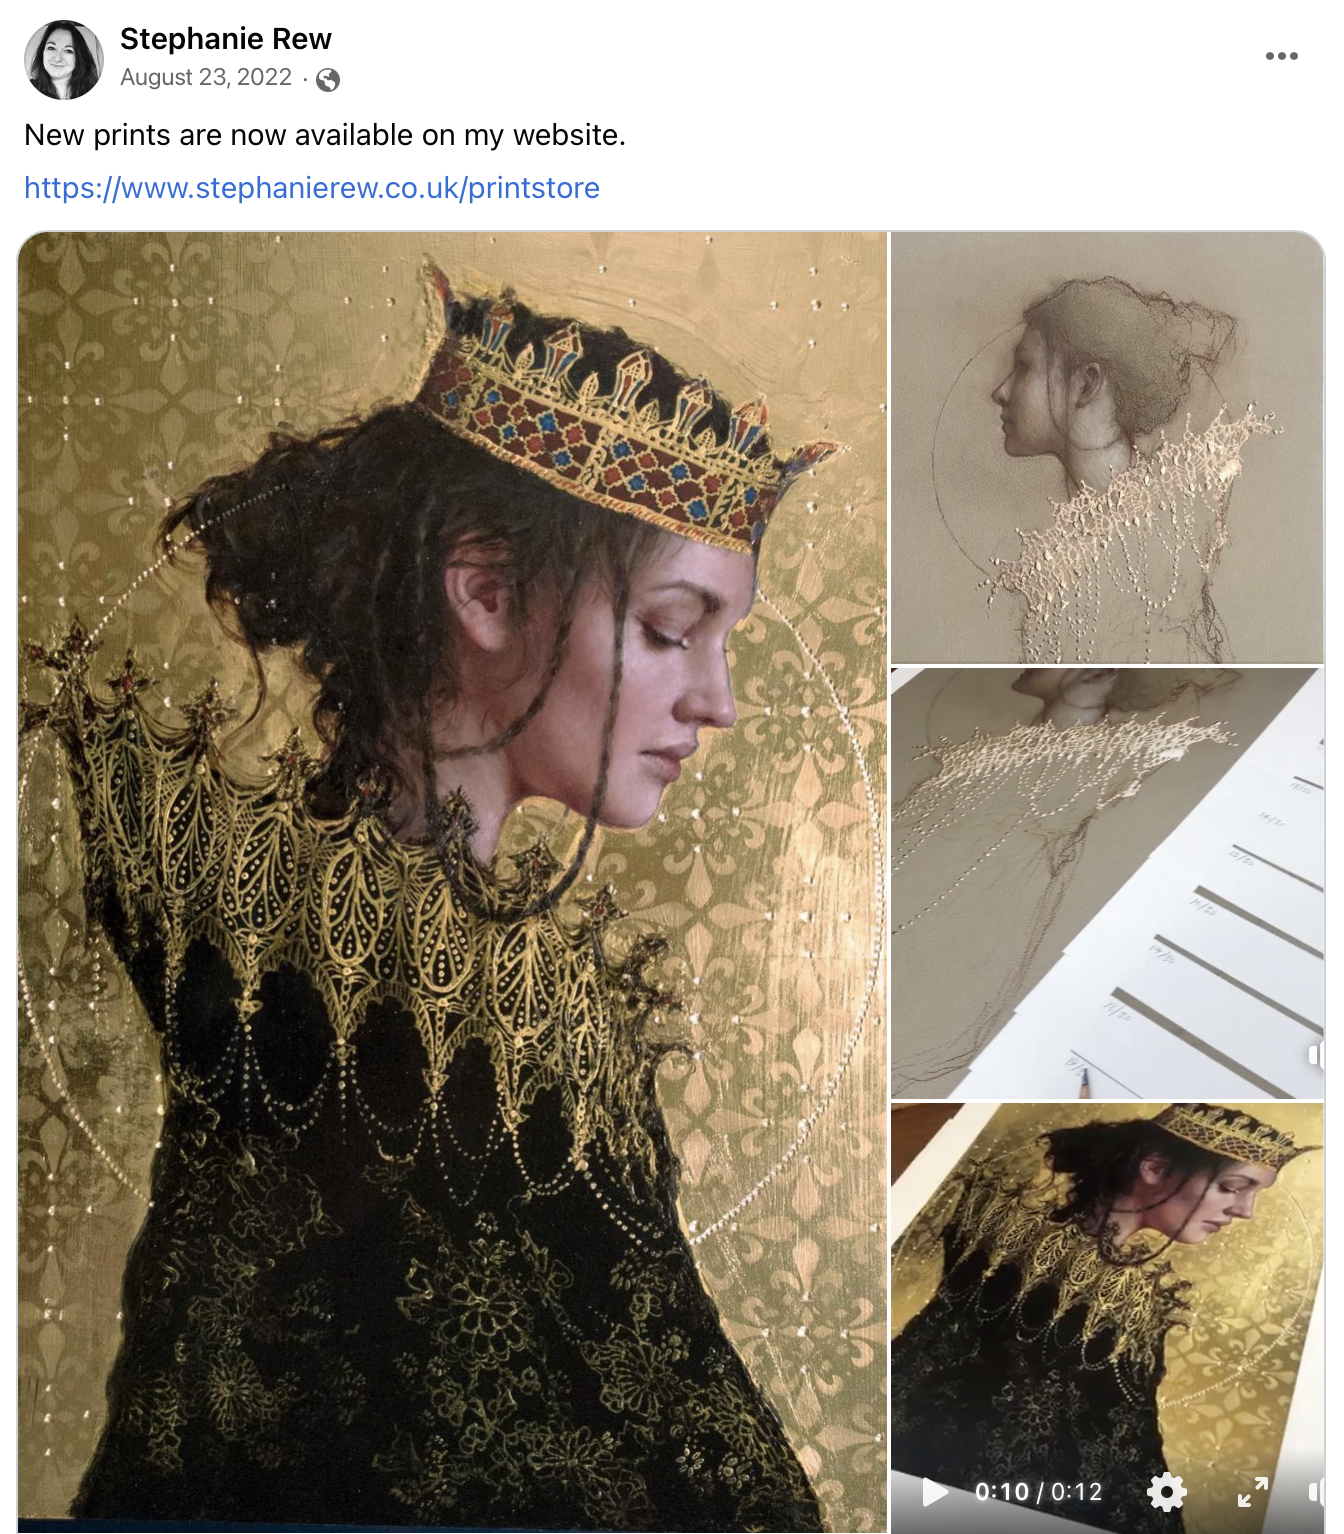 Stephanie Rew directs Facebook visitors to her artist website, where she sells art directly via an online store. 